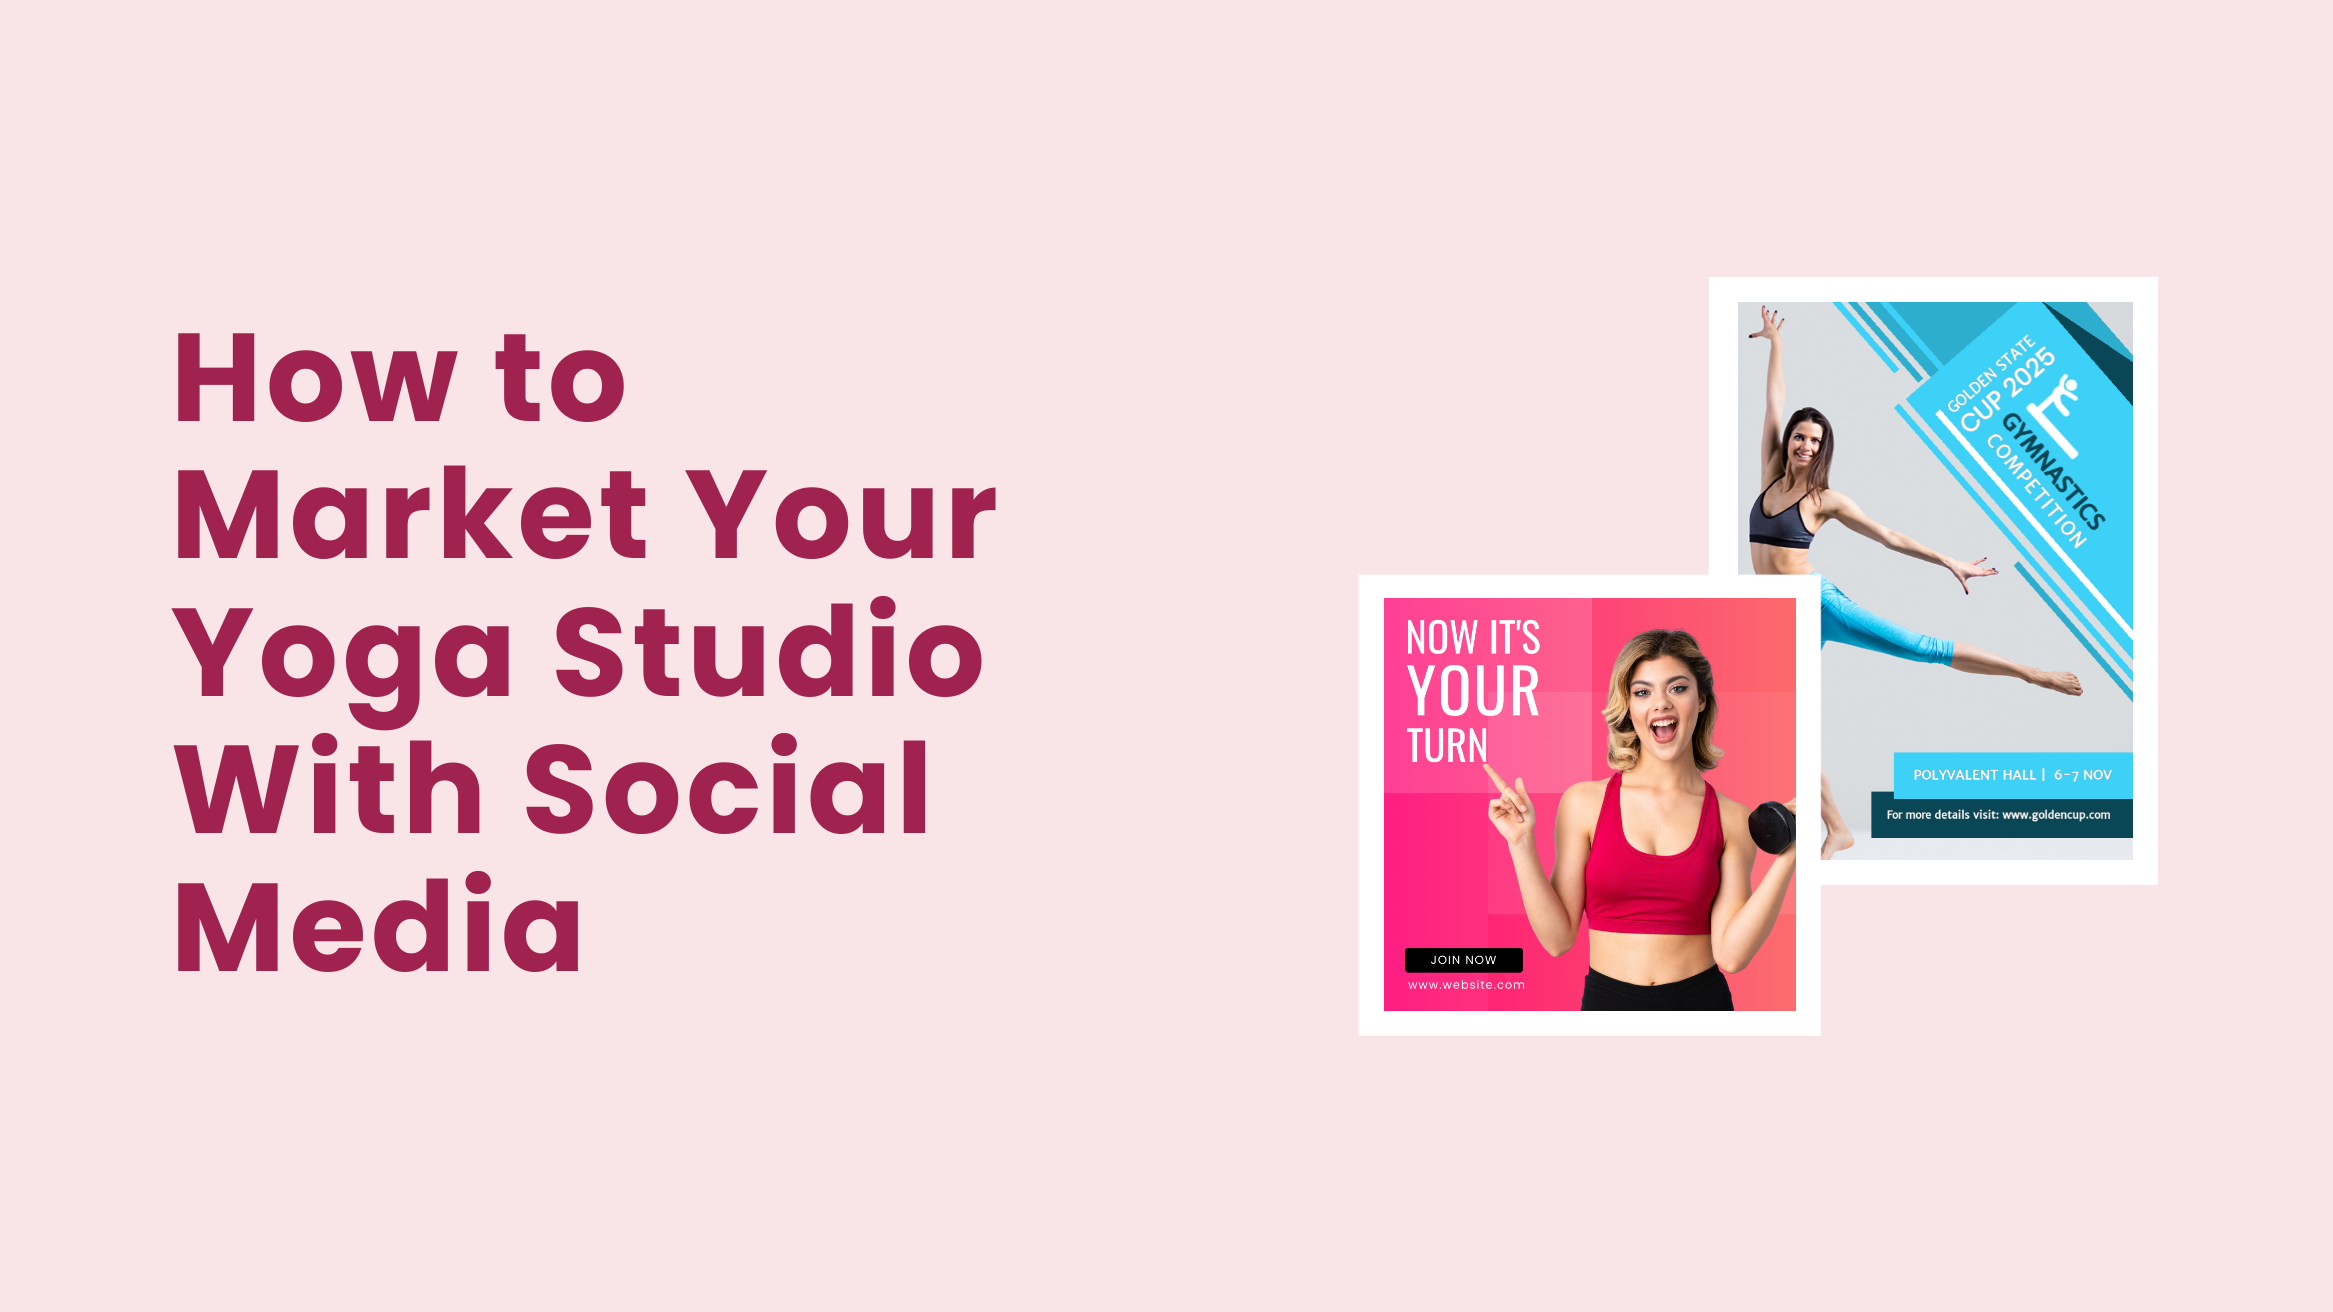 How to Market Your Yoga Studio With Social Media